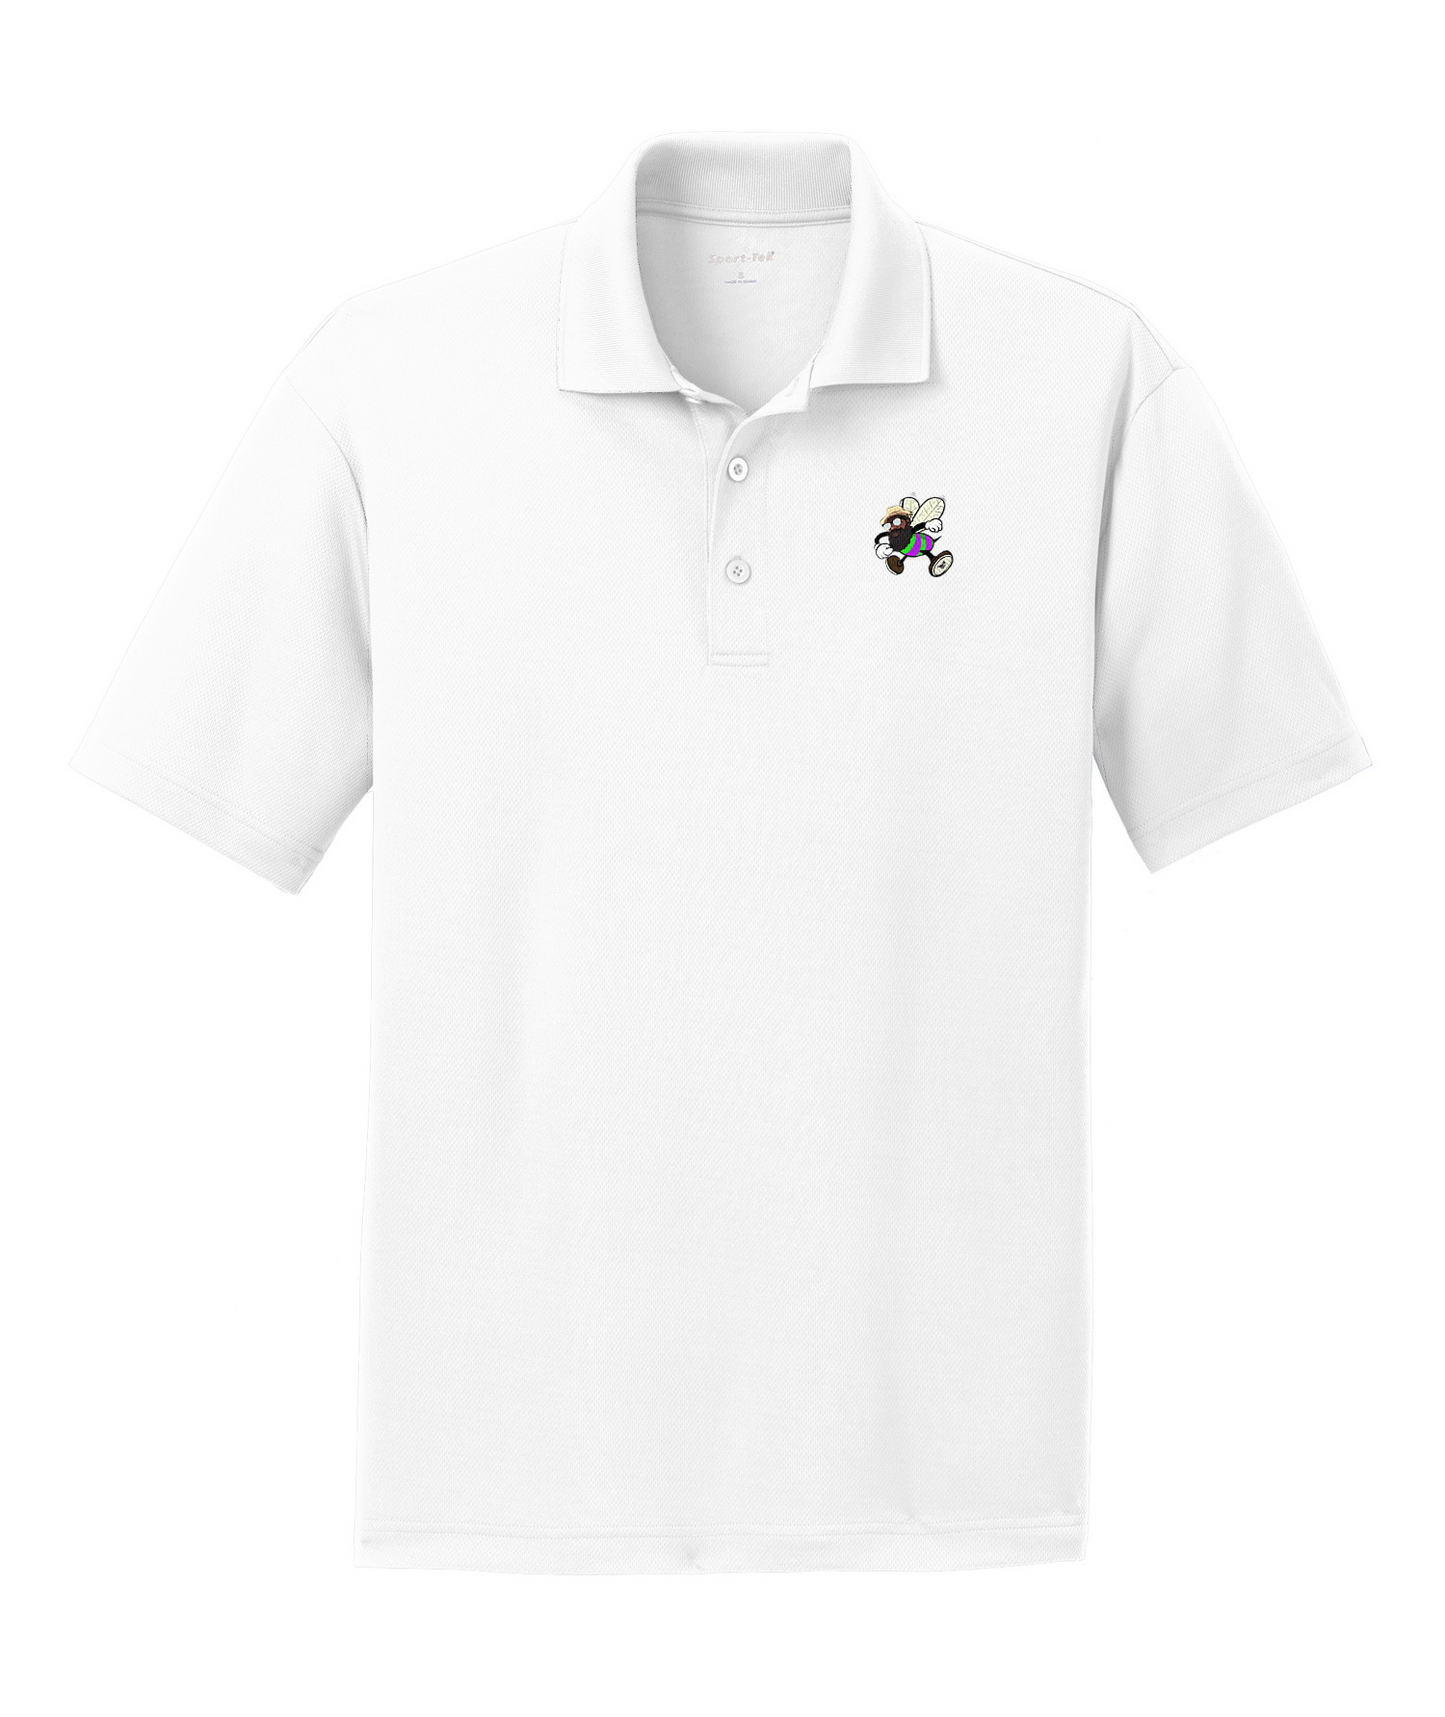 Be Who You Bee Embroidered Men's Ultrafine Mesh Polo or Similar